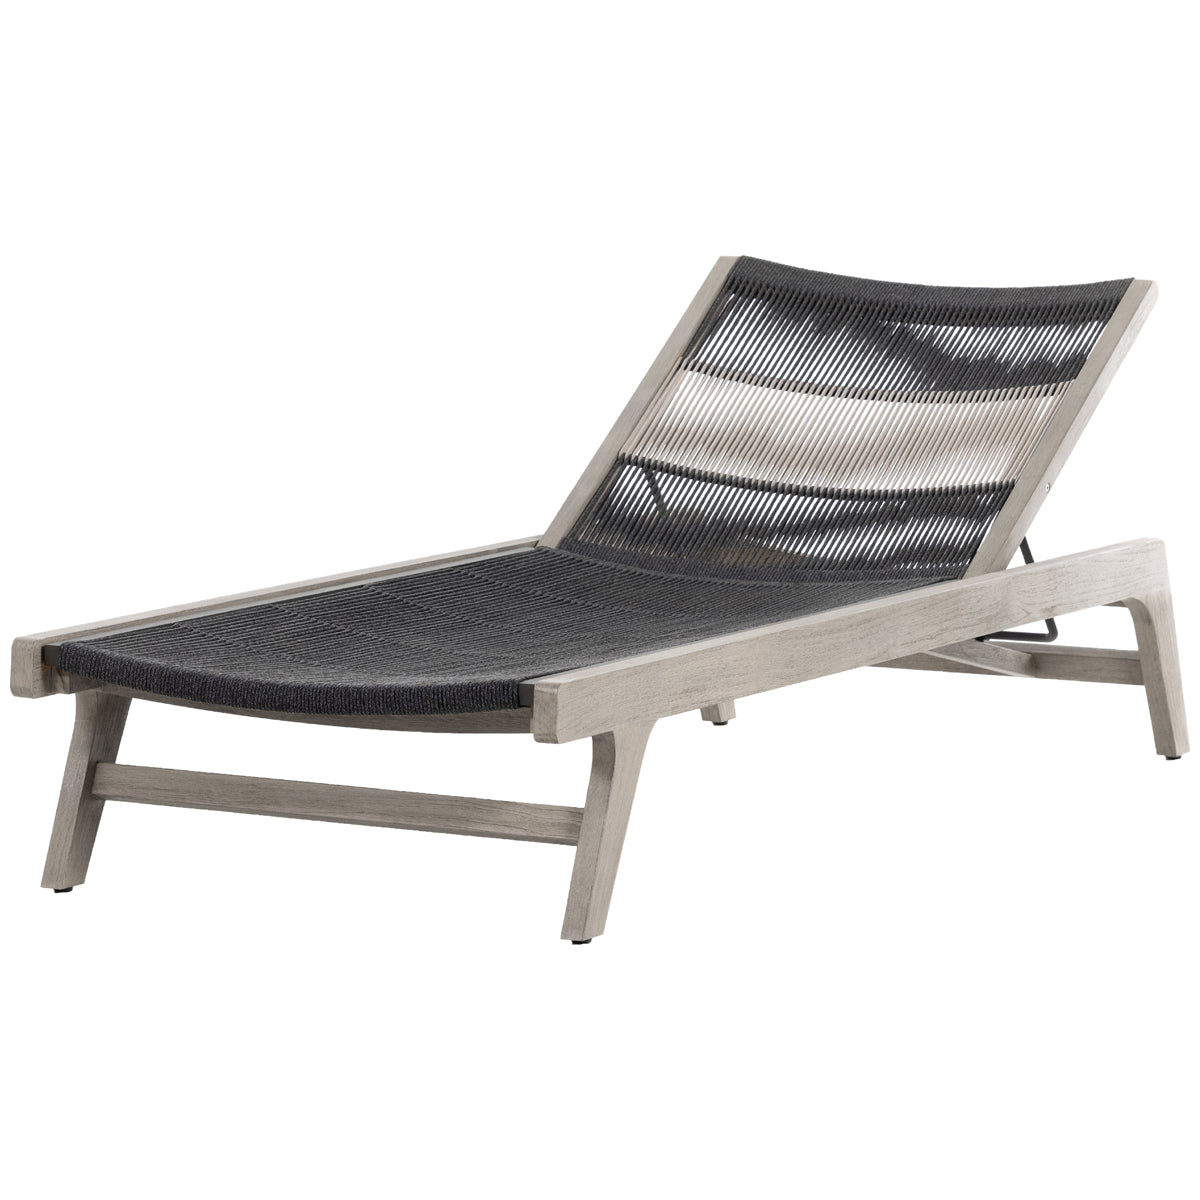 Four Hands Solano Julian Outdoor Chaise